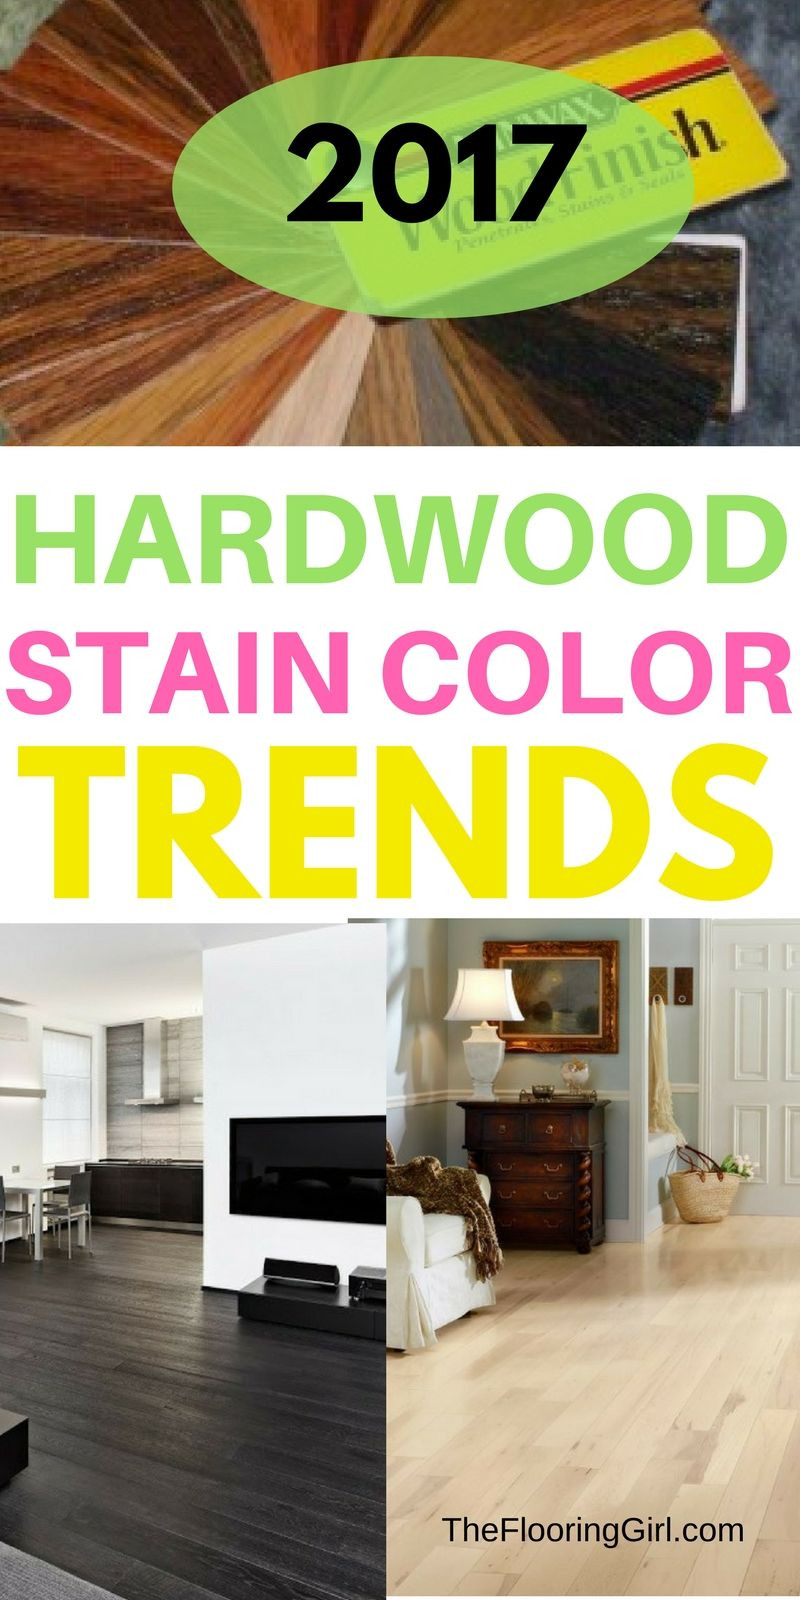 27 Great Glue Down Hardwood Flooring Cost 2024 free download glue down hardwood flooring cost of hardwood flooring stain color trends 2018 more from the flooring in hardwood flooring stain color trends for 2017 hardwood colors that are in style theflo